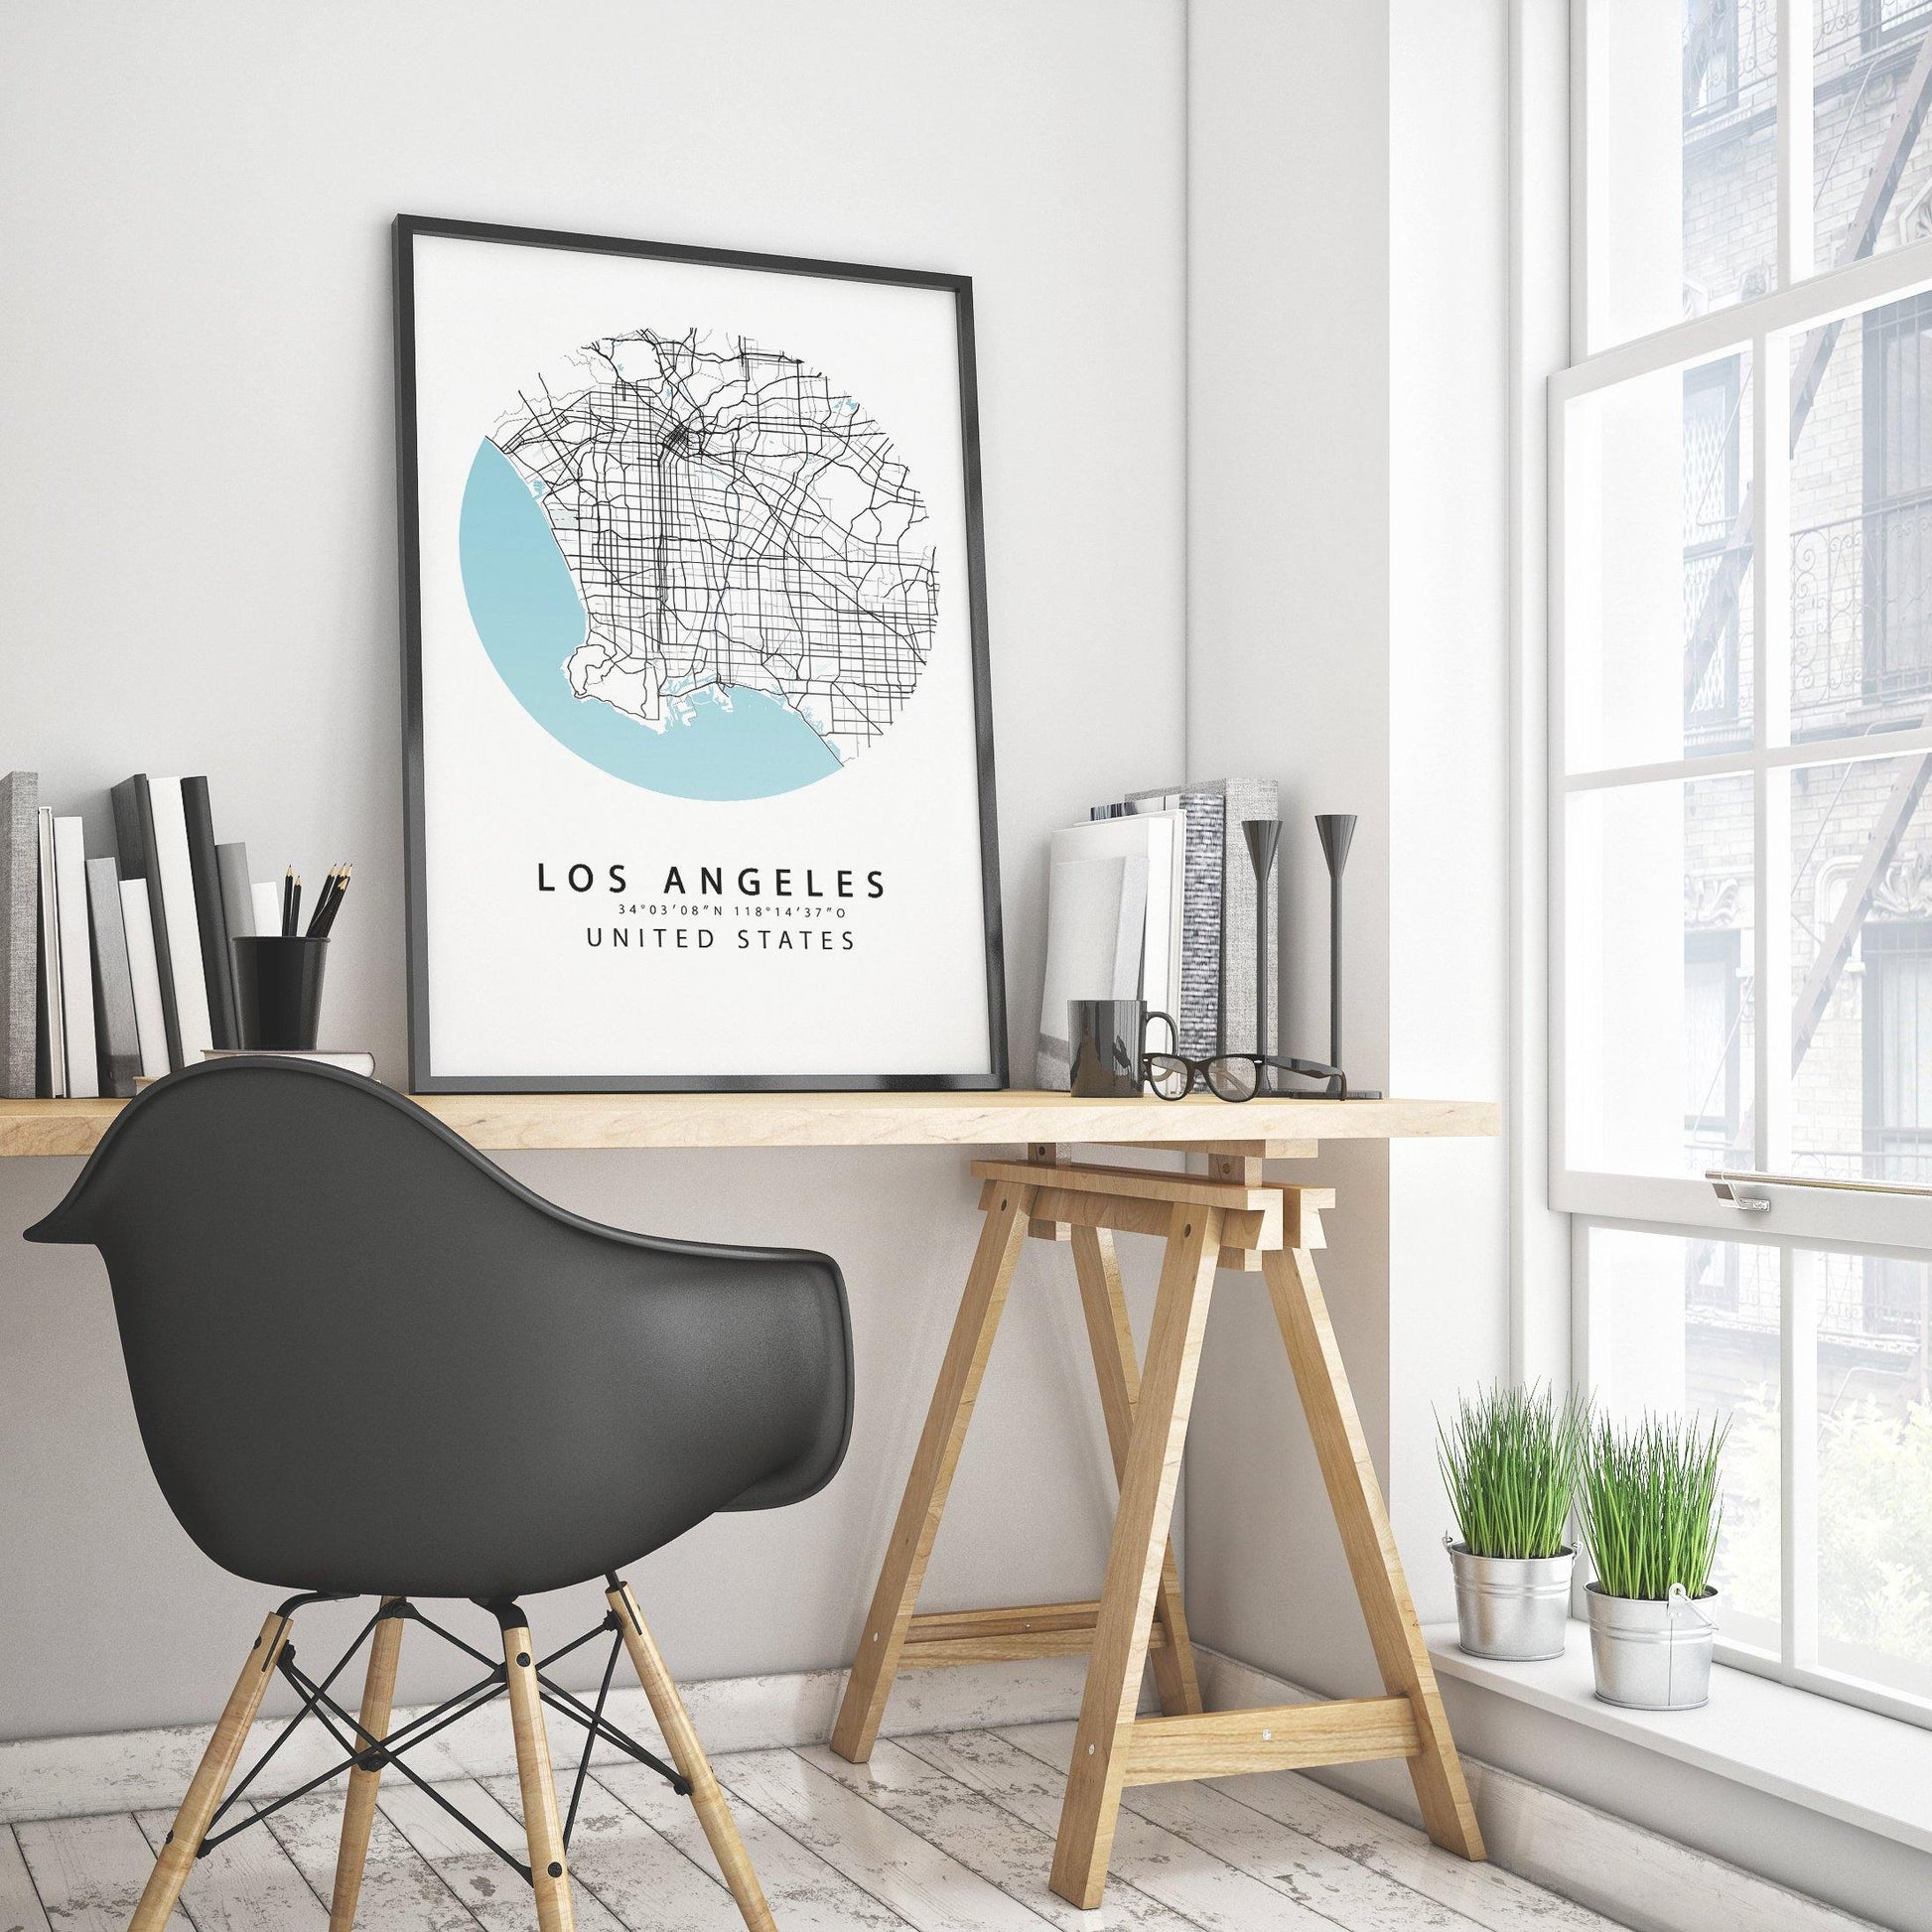 A beautiful tribute to America's second most populous city. Printed on high quality paper and featuring a stylish Los Angeles city map, this print is a stunning addition to any room. Perfect for anyone who loves beautiful architecture, stunning skylines and all things California, this print is a must-have for any fan of the City of Angels.